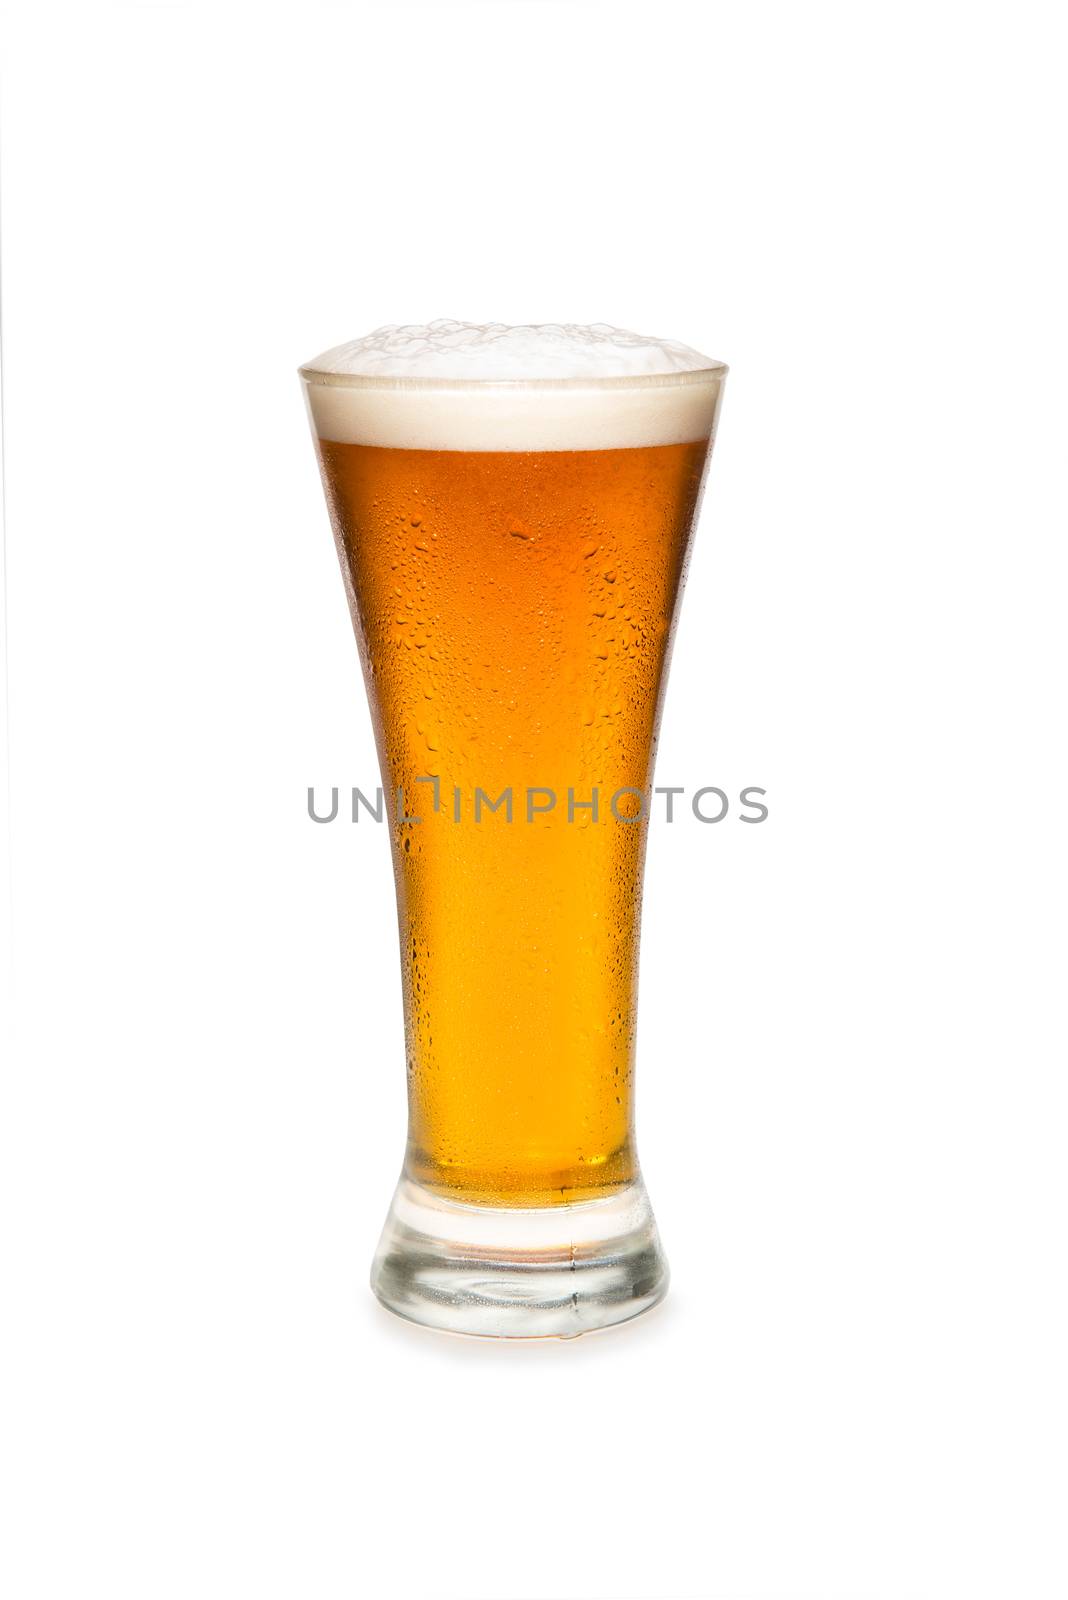 Beer In a Pilsner Glass by patrickstock